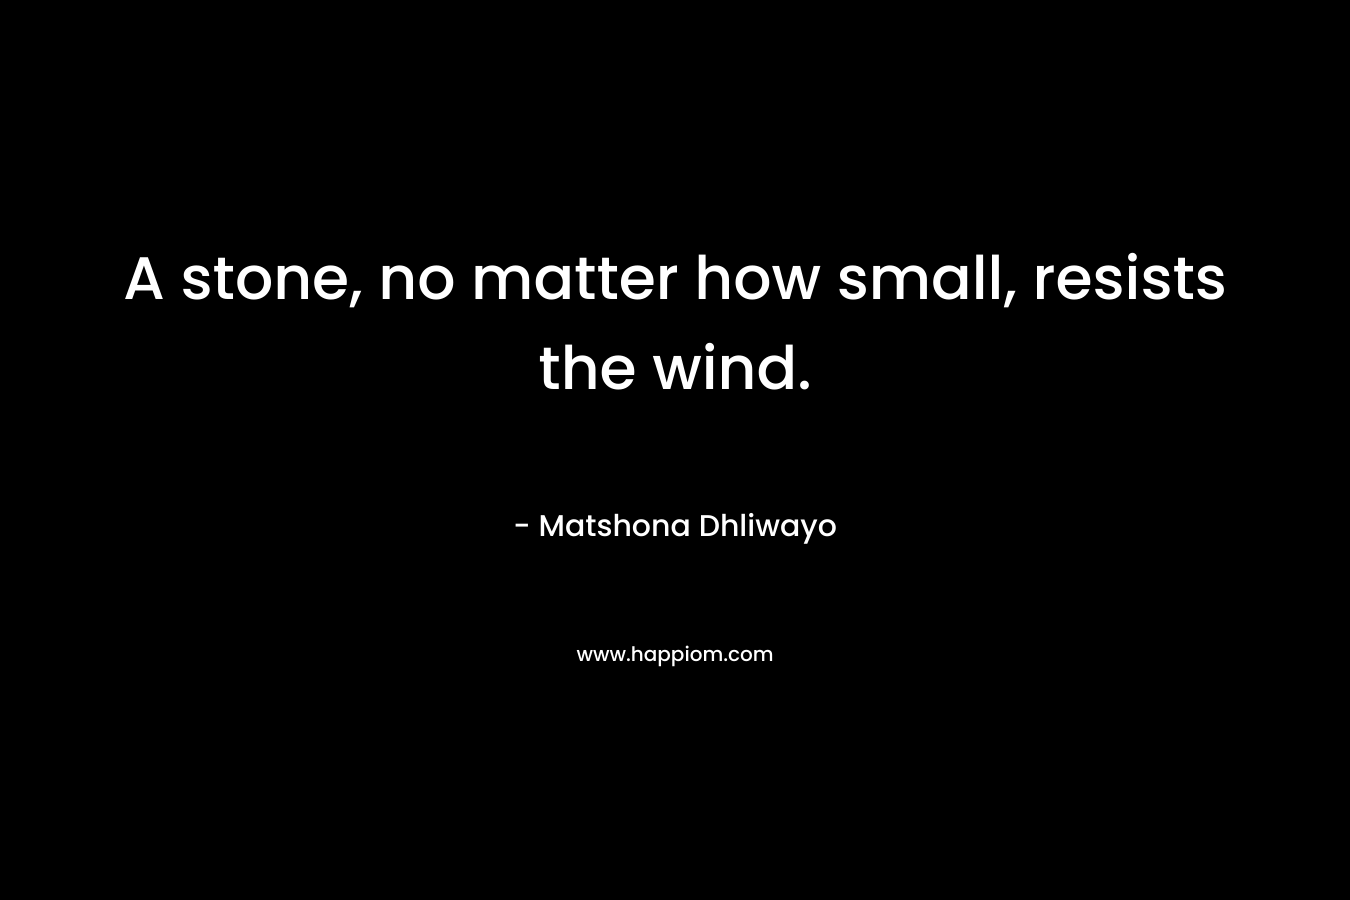 A stone, no matter how small, resists the wind.